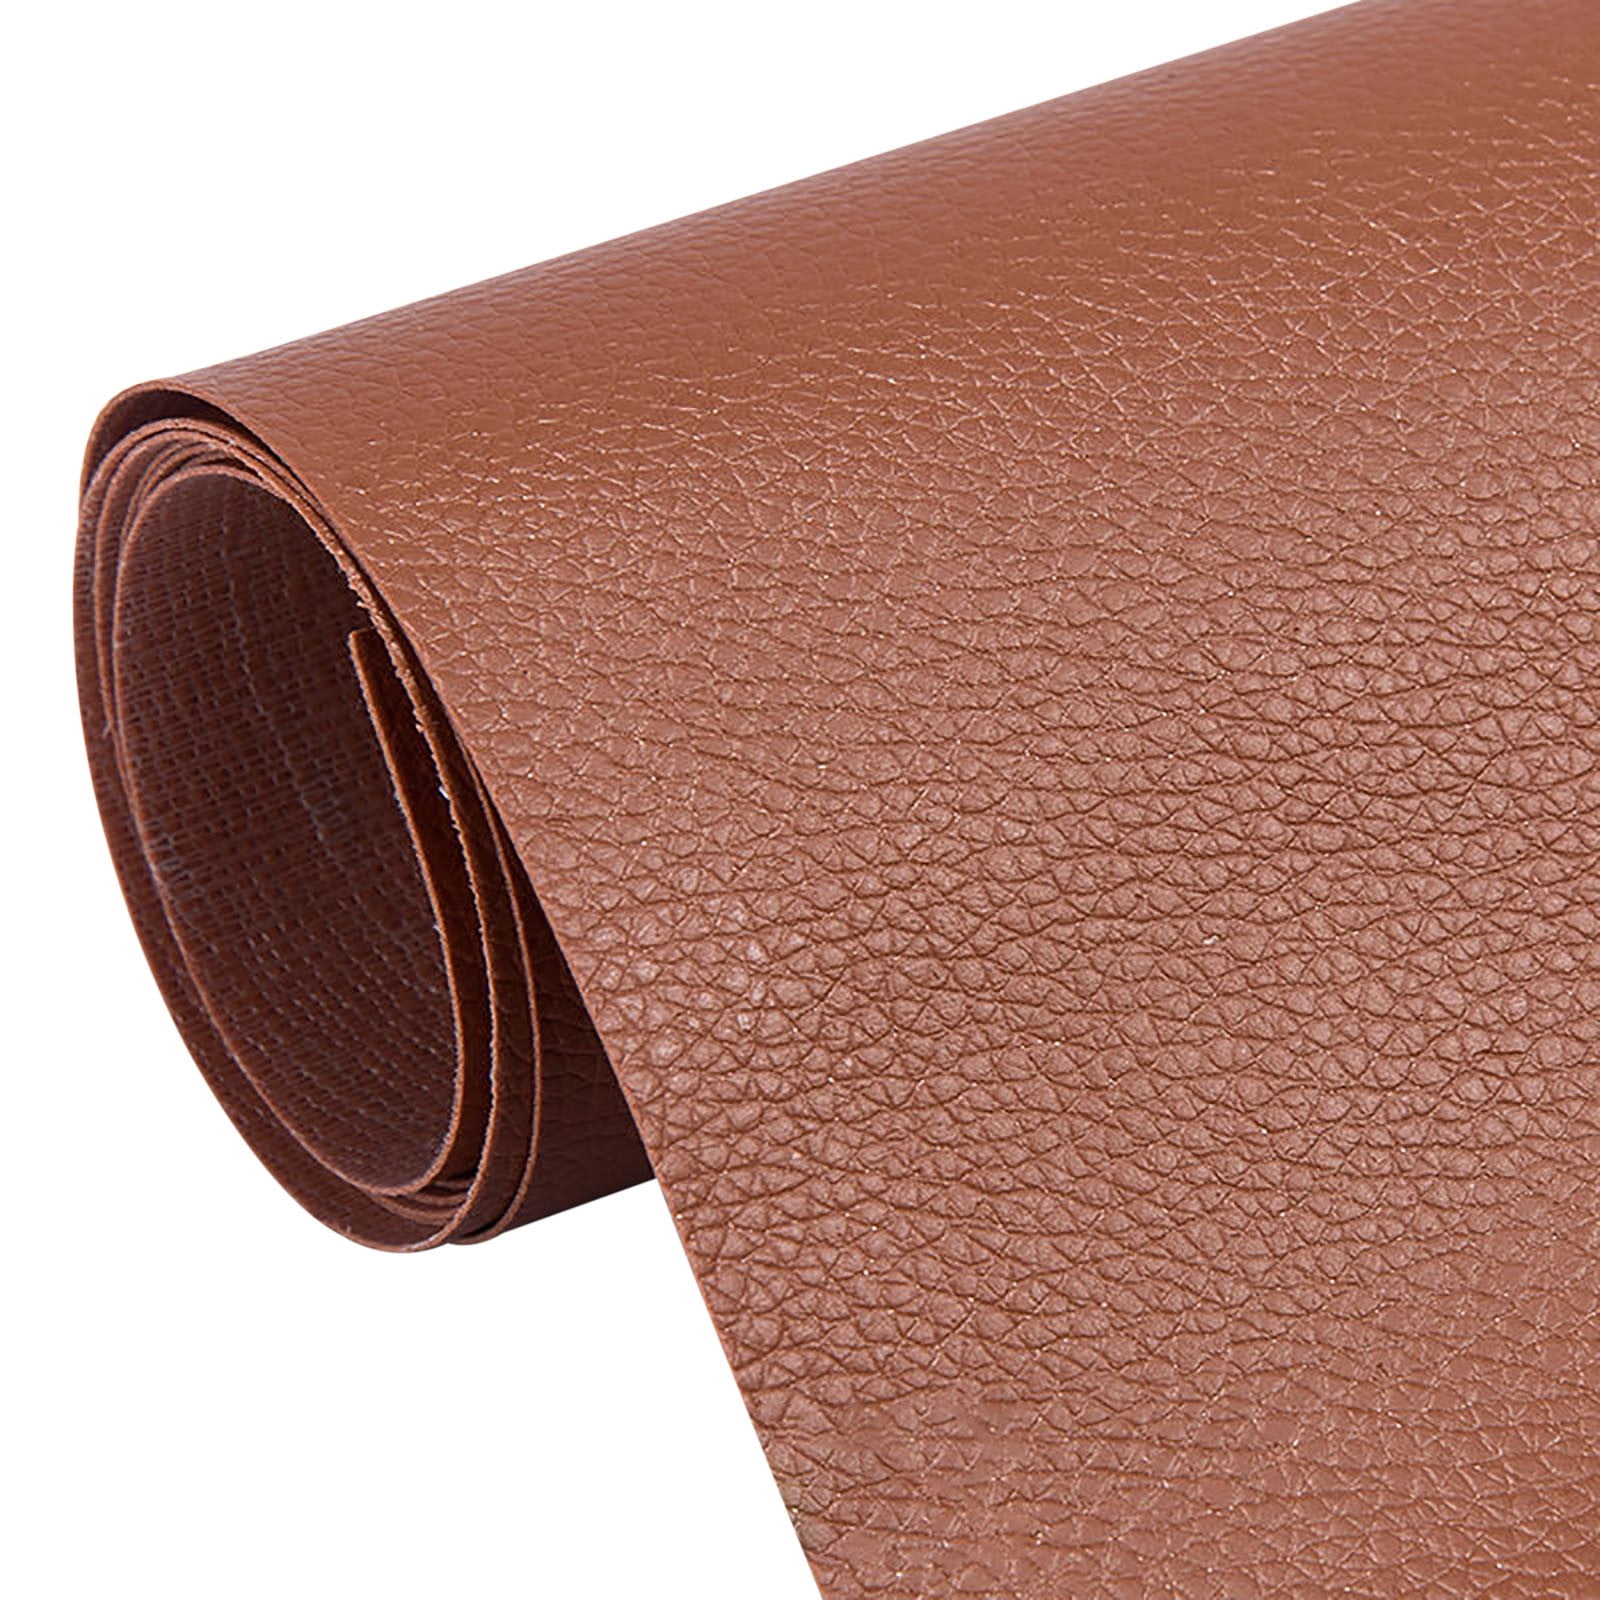 Deals on Nw Plain Self-adhesive Pu Leather Leather Repair Sofa Leather  Repair Car Seat Leather Repair Patch-adhesive Backing-first Aid For Sofa  Car Seat Environmental Leather Cream Color